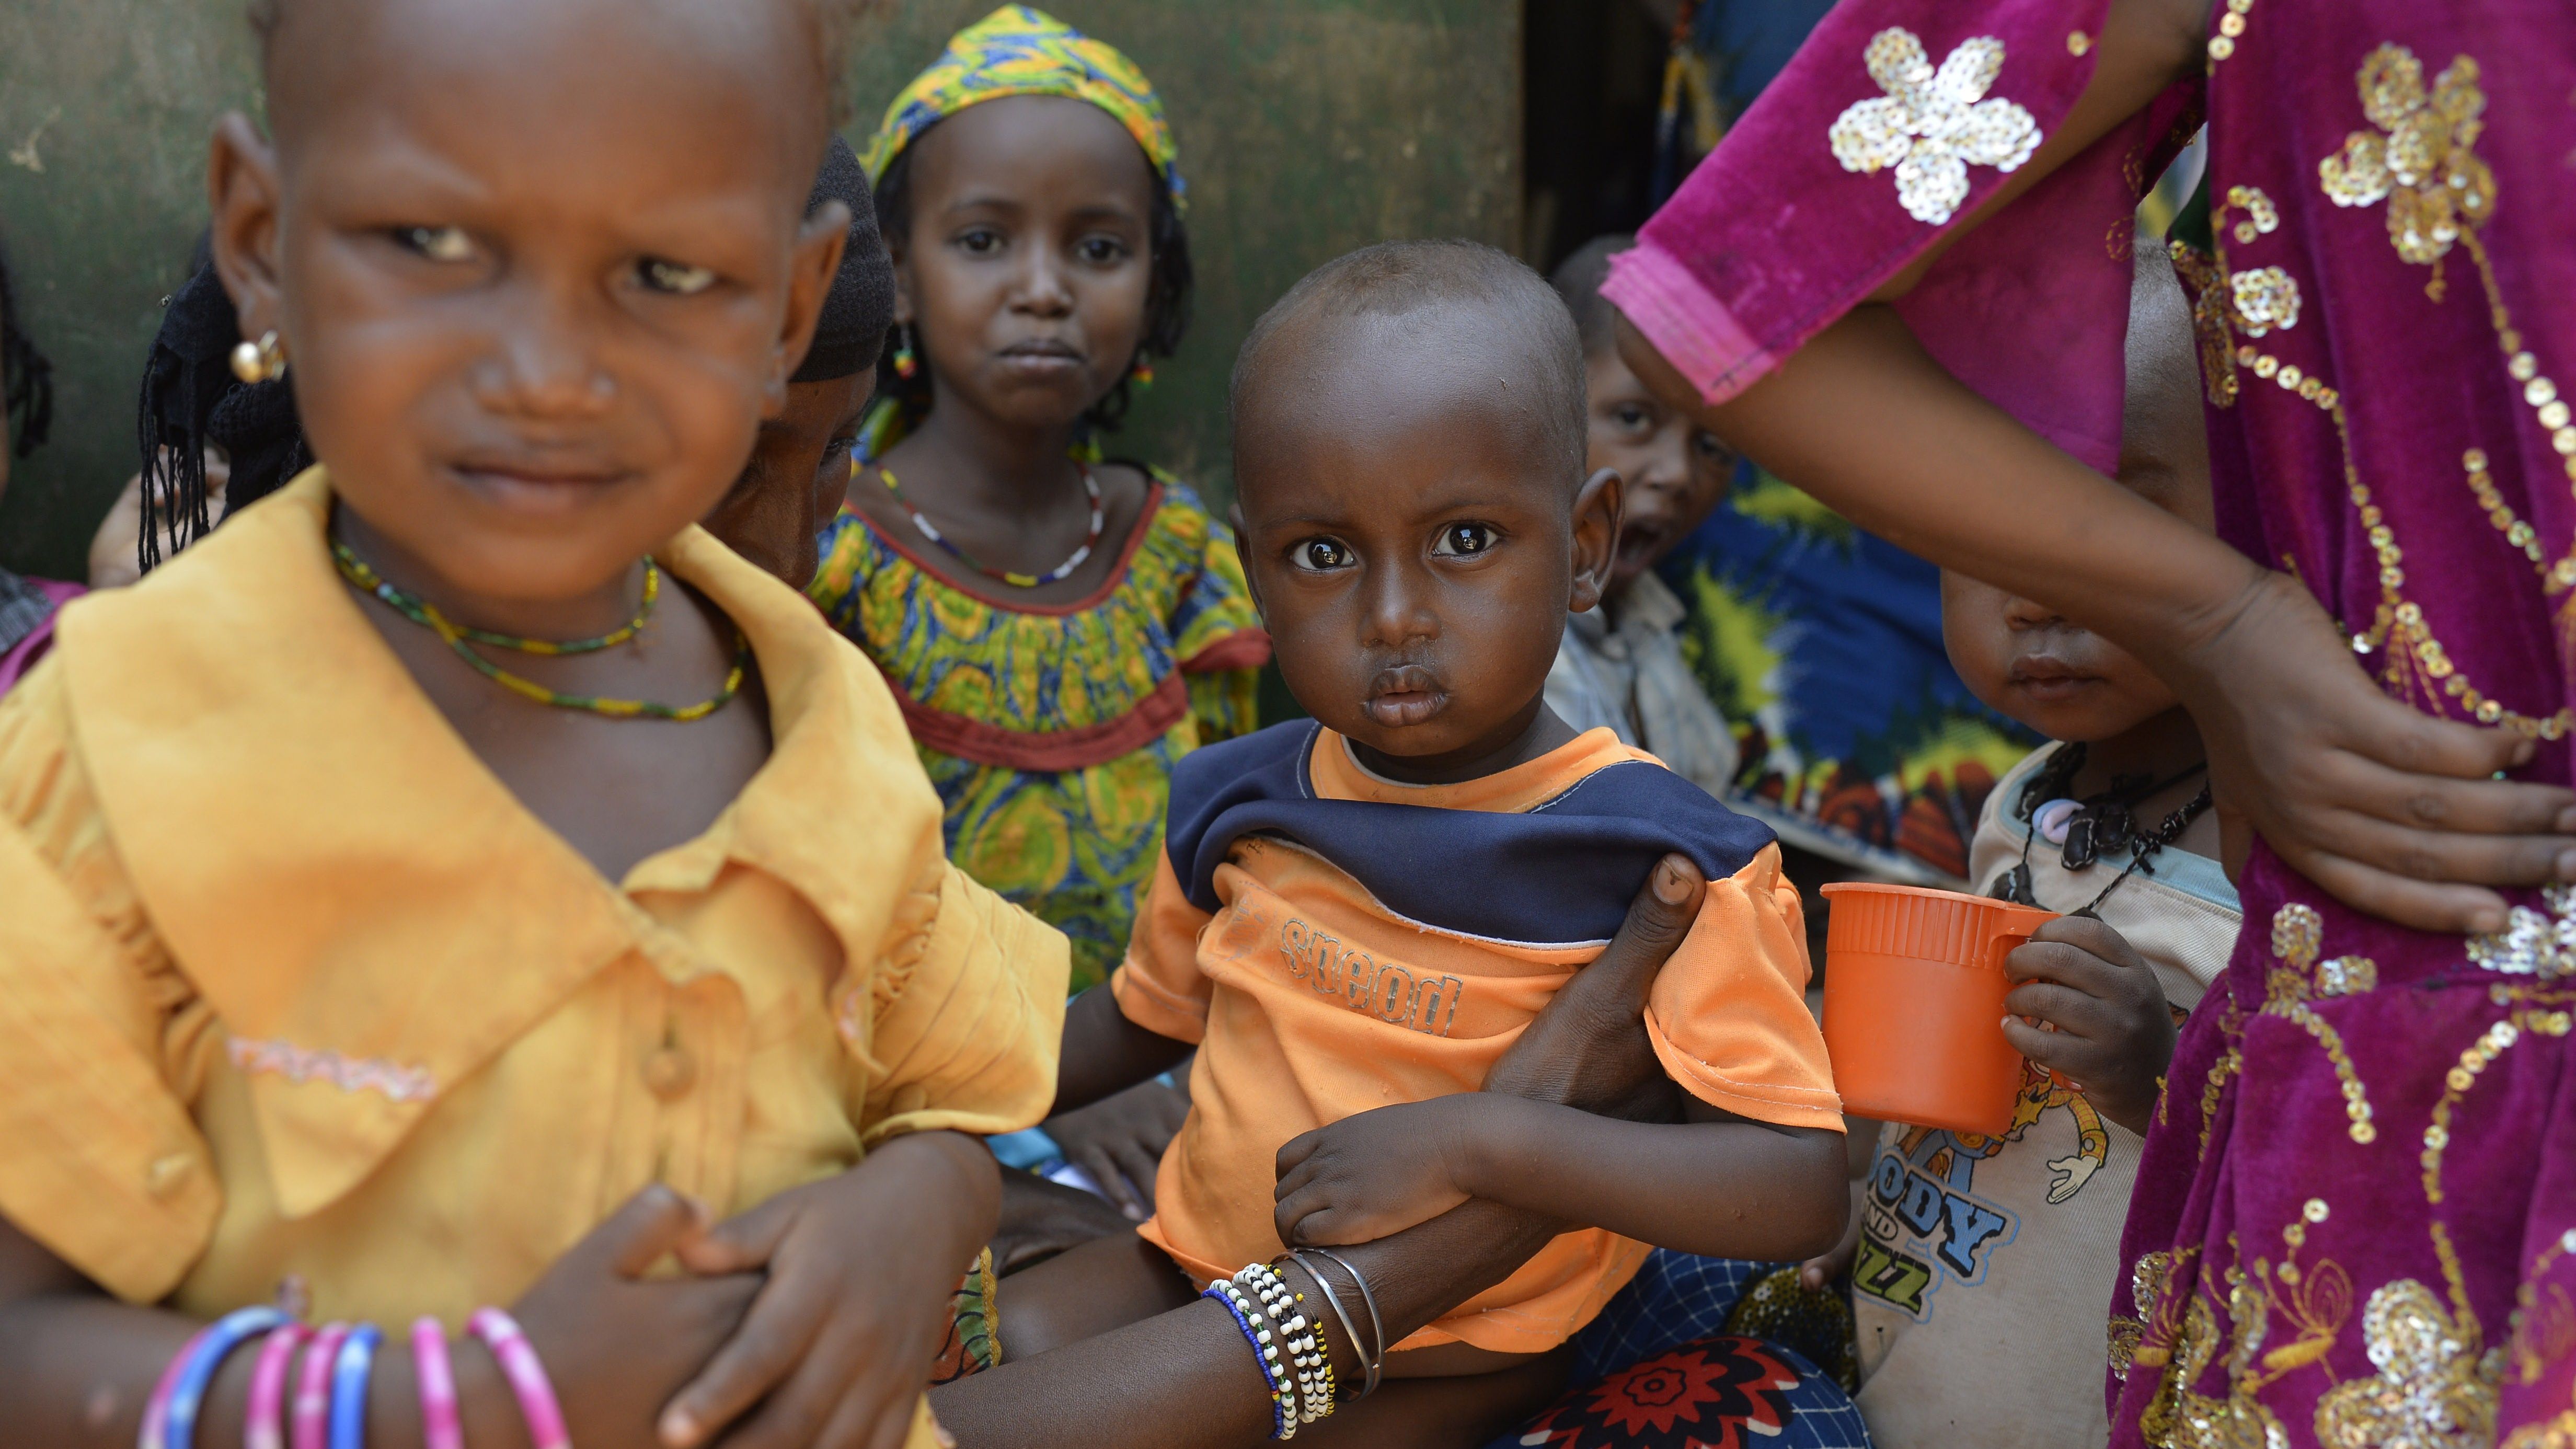 Women and children wait in line in the Begoua district, northeast of Bangui, to receive aid Wednesday.